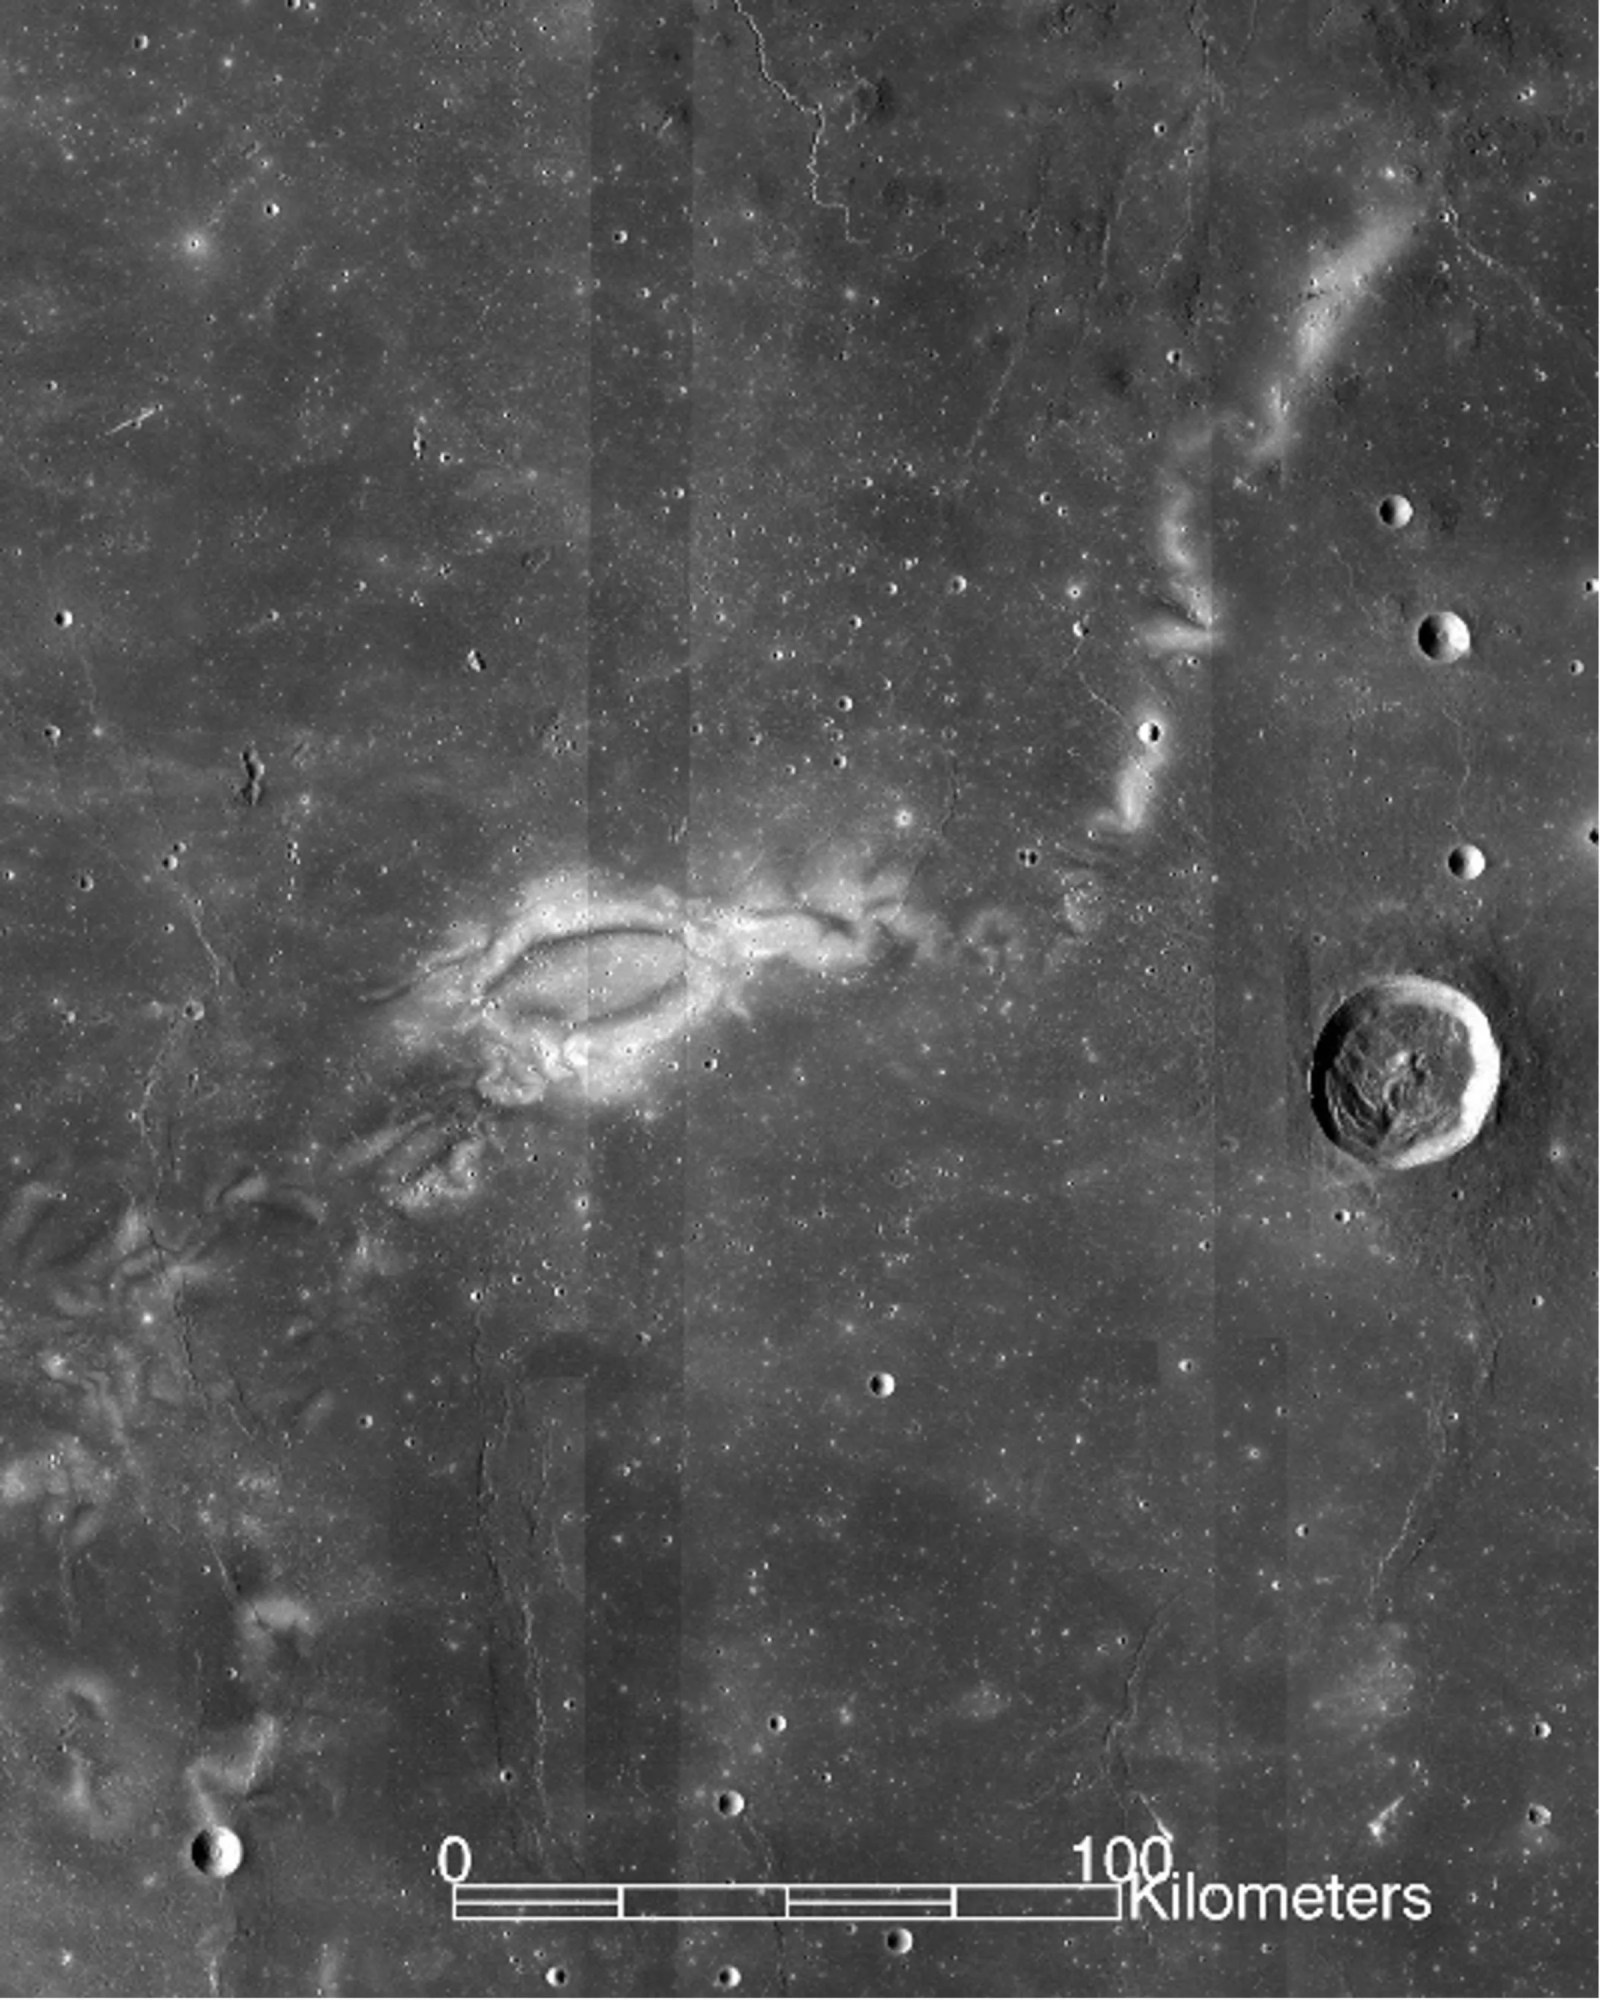 The image is of a large geological feature on the lunar surface. The majority of the image is dark grey and appearing to show a relatively flat expanse. A few small craters are scattered throughout and one large one on the far right. In the center-left of the image, Reiner Gamma appears as a light-colored oval with wispy, white edges like a cloud. Additional scattered streaks of white extend up and to the right of the swirl. Along the bottom of the image is a scale indicating that the main part of the swirl